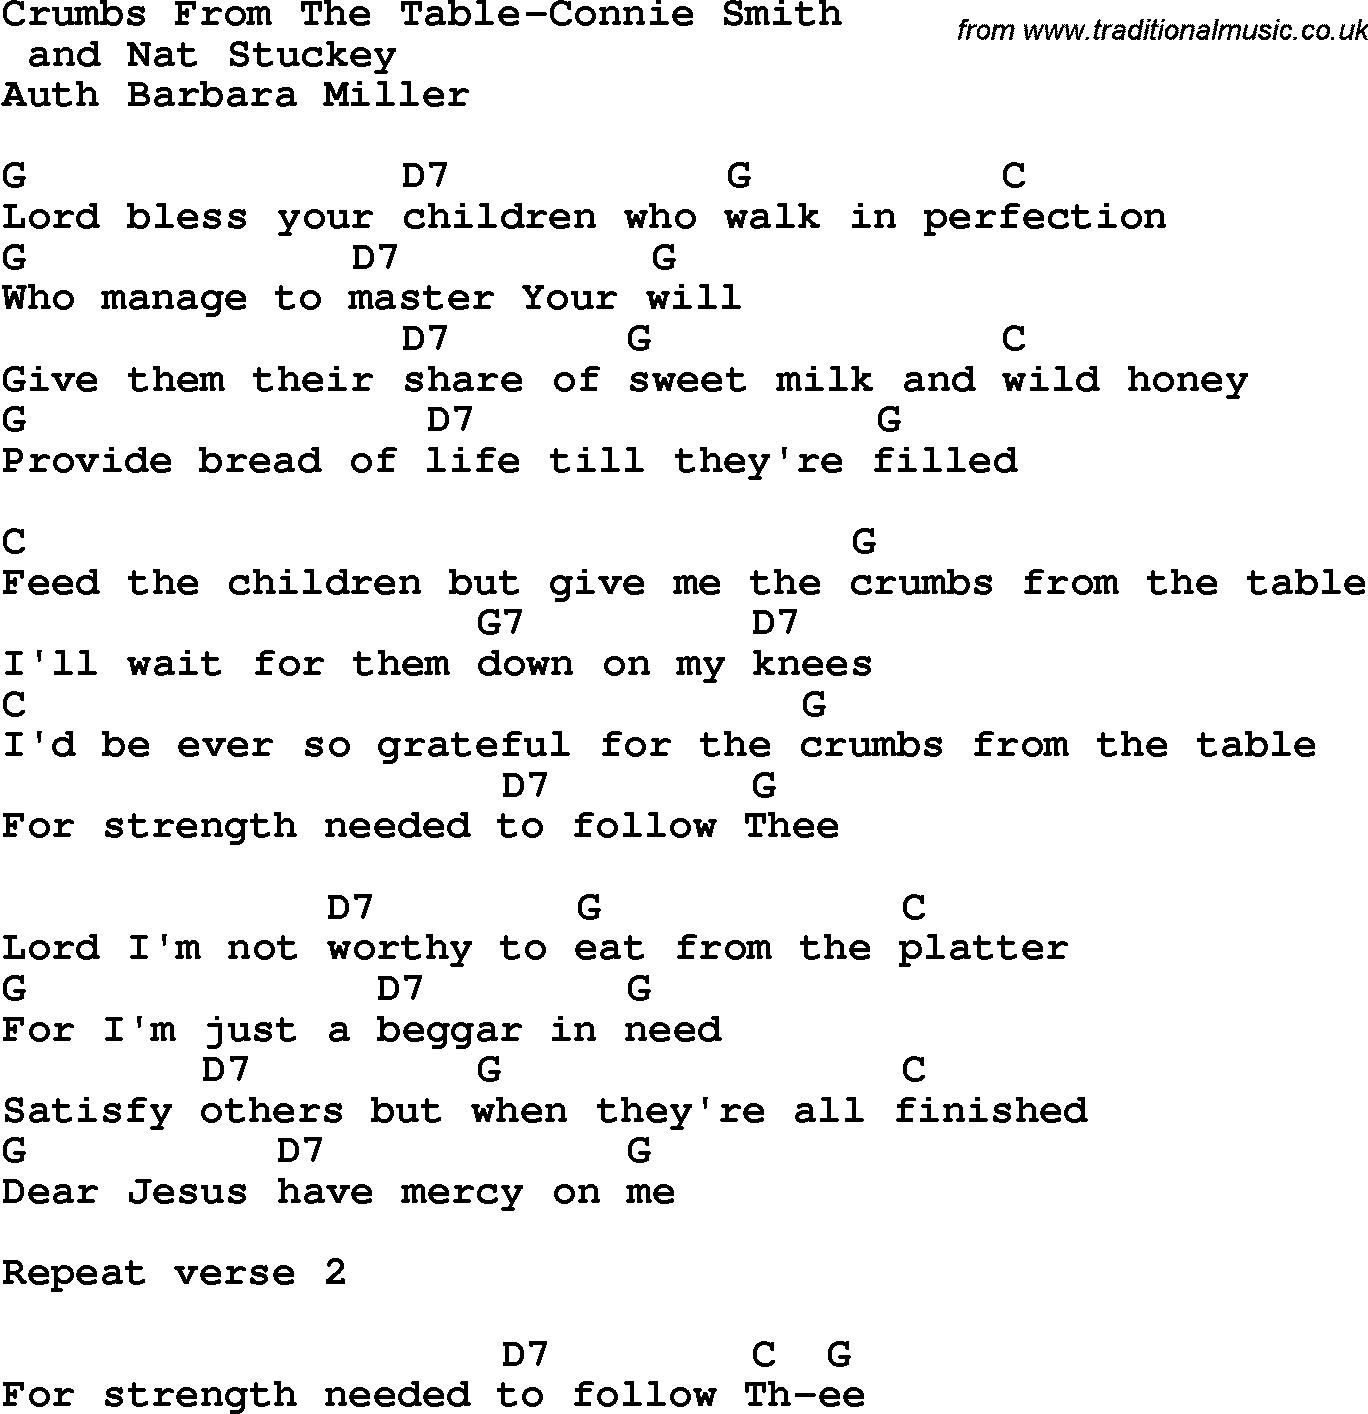 Country, Southern and Bluegrass Gospel Song Crumbs From The Table-Connie Smith lyrics and chords